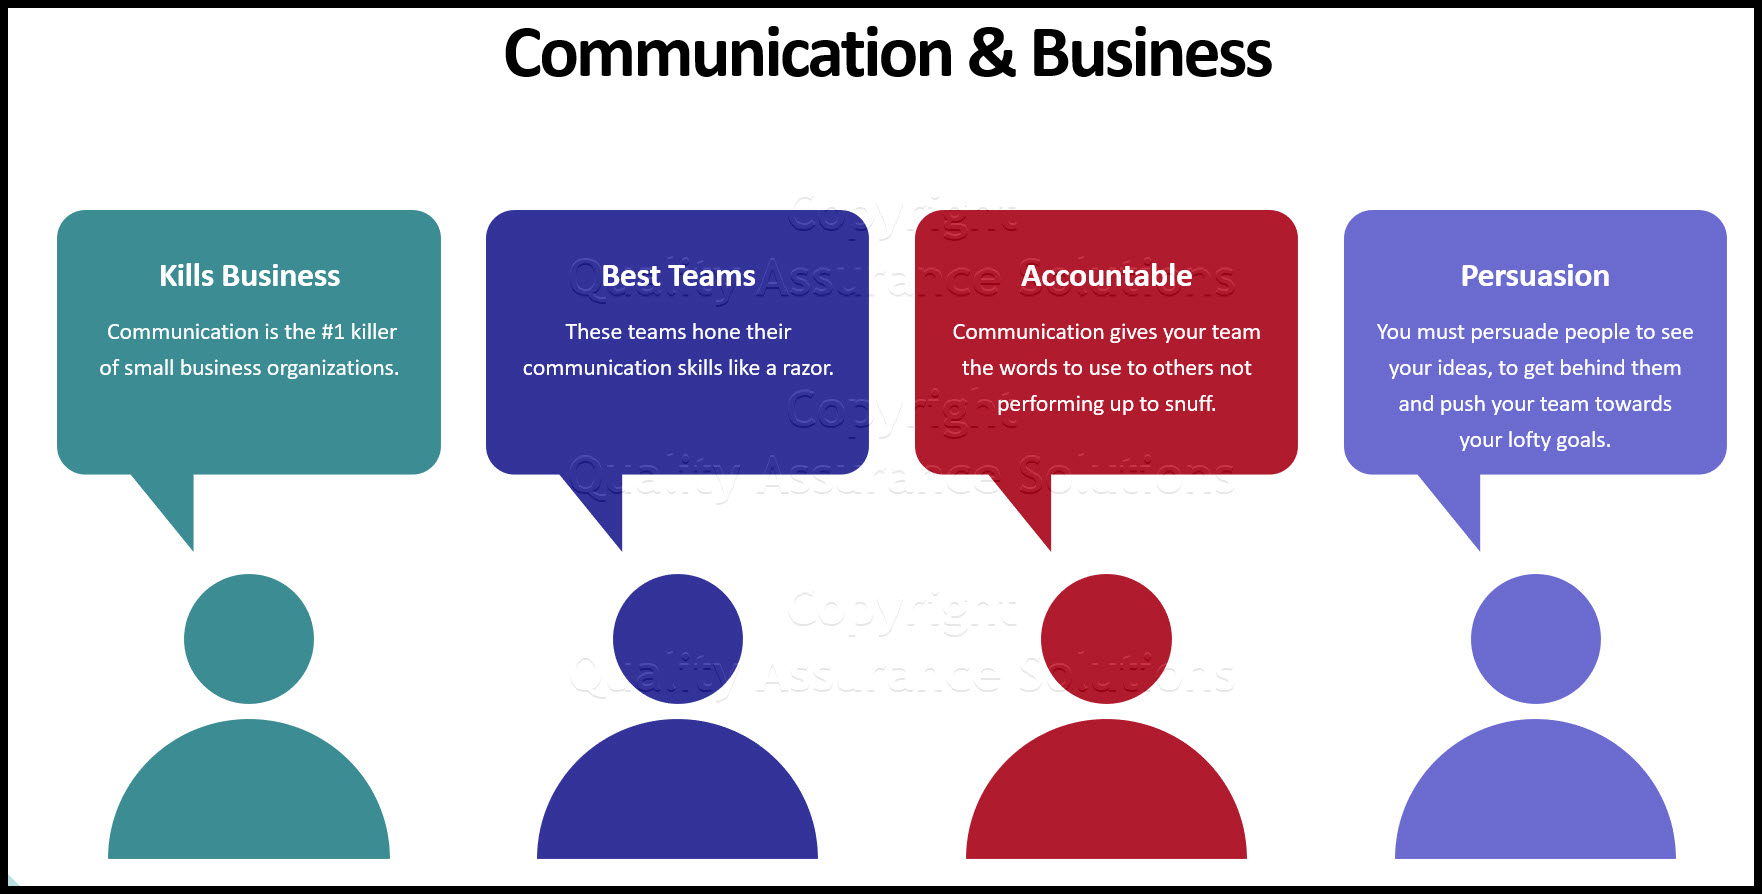 Team building communication: Building communication skills can become your team's major competitive advantage..